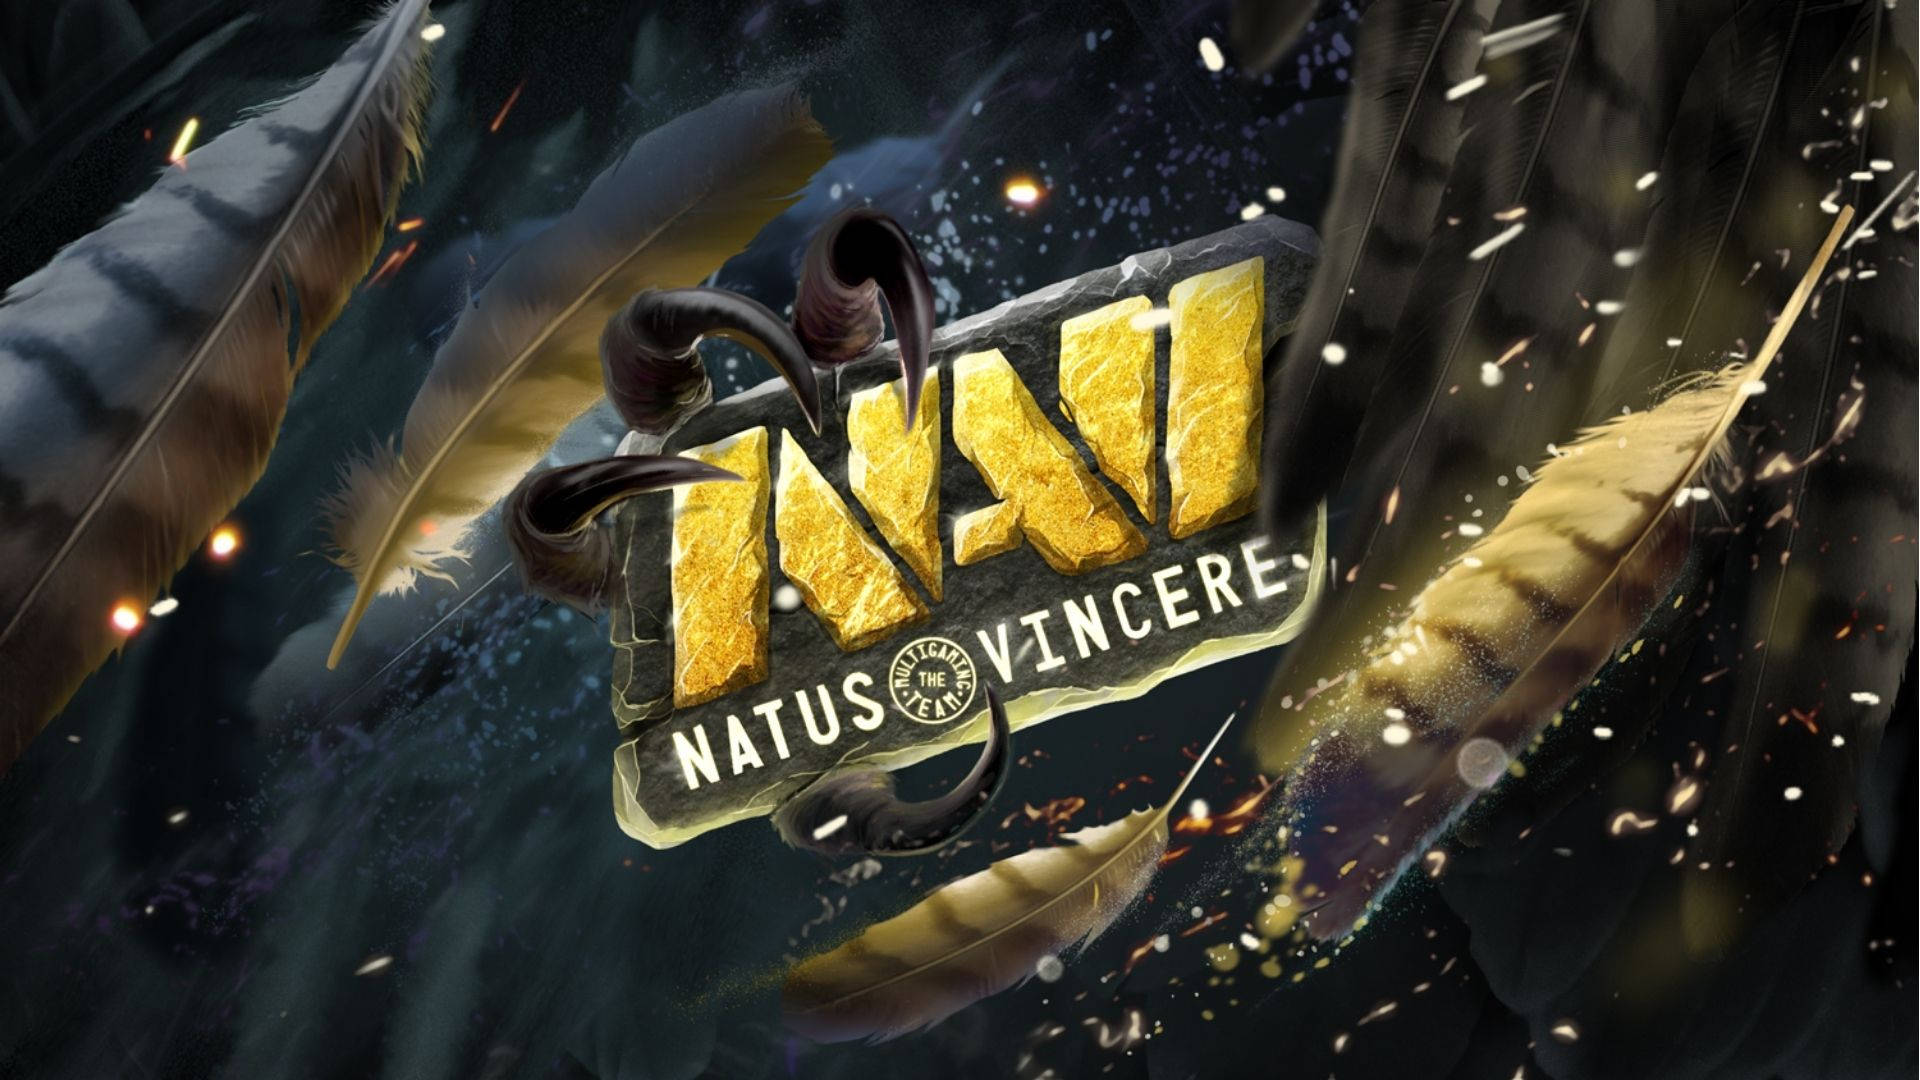 Claw Holding Natus Vincere